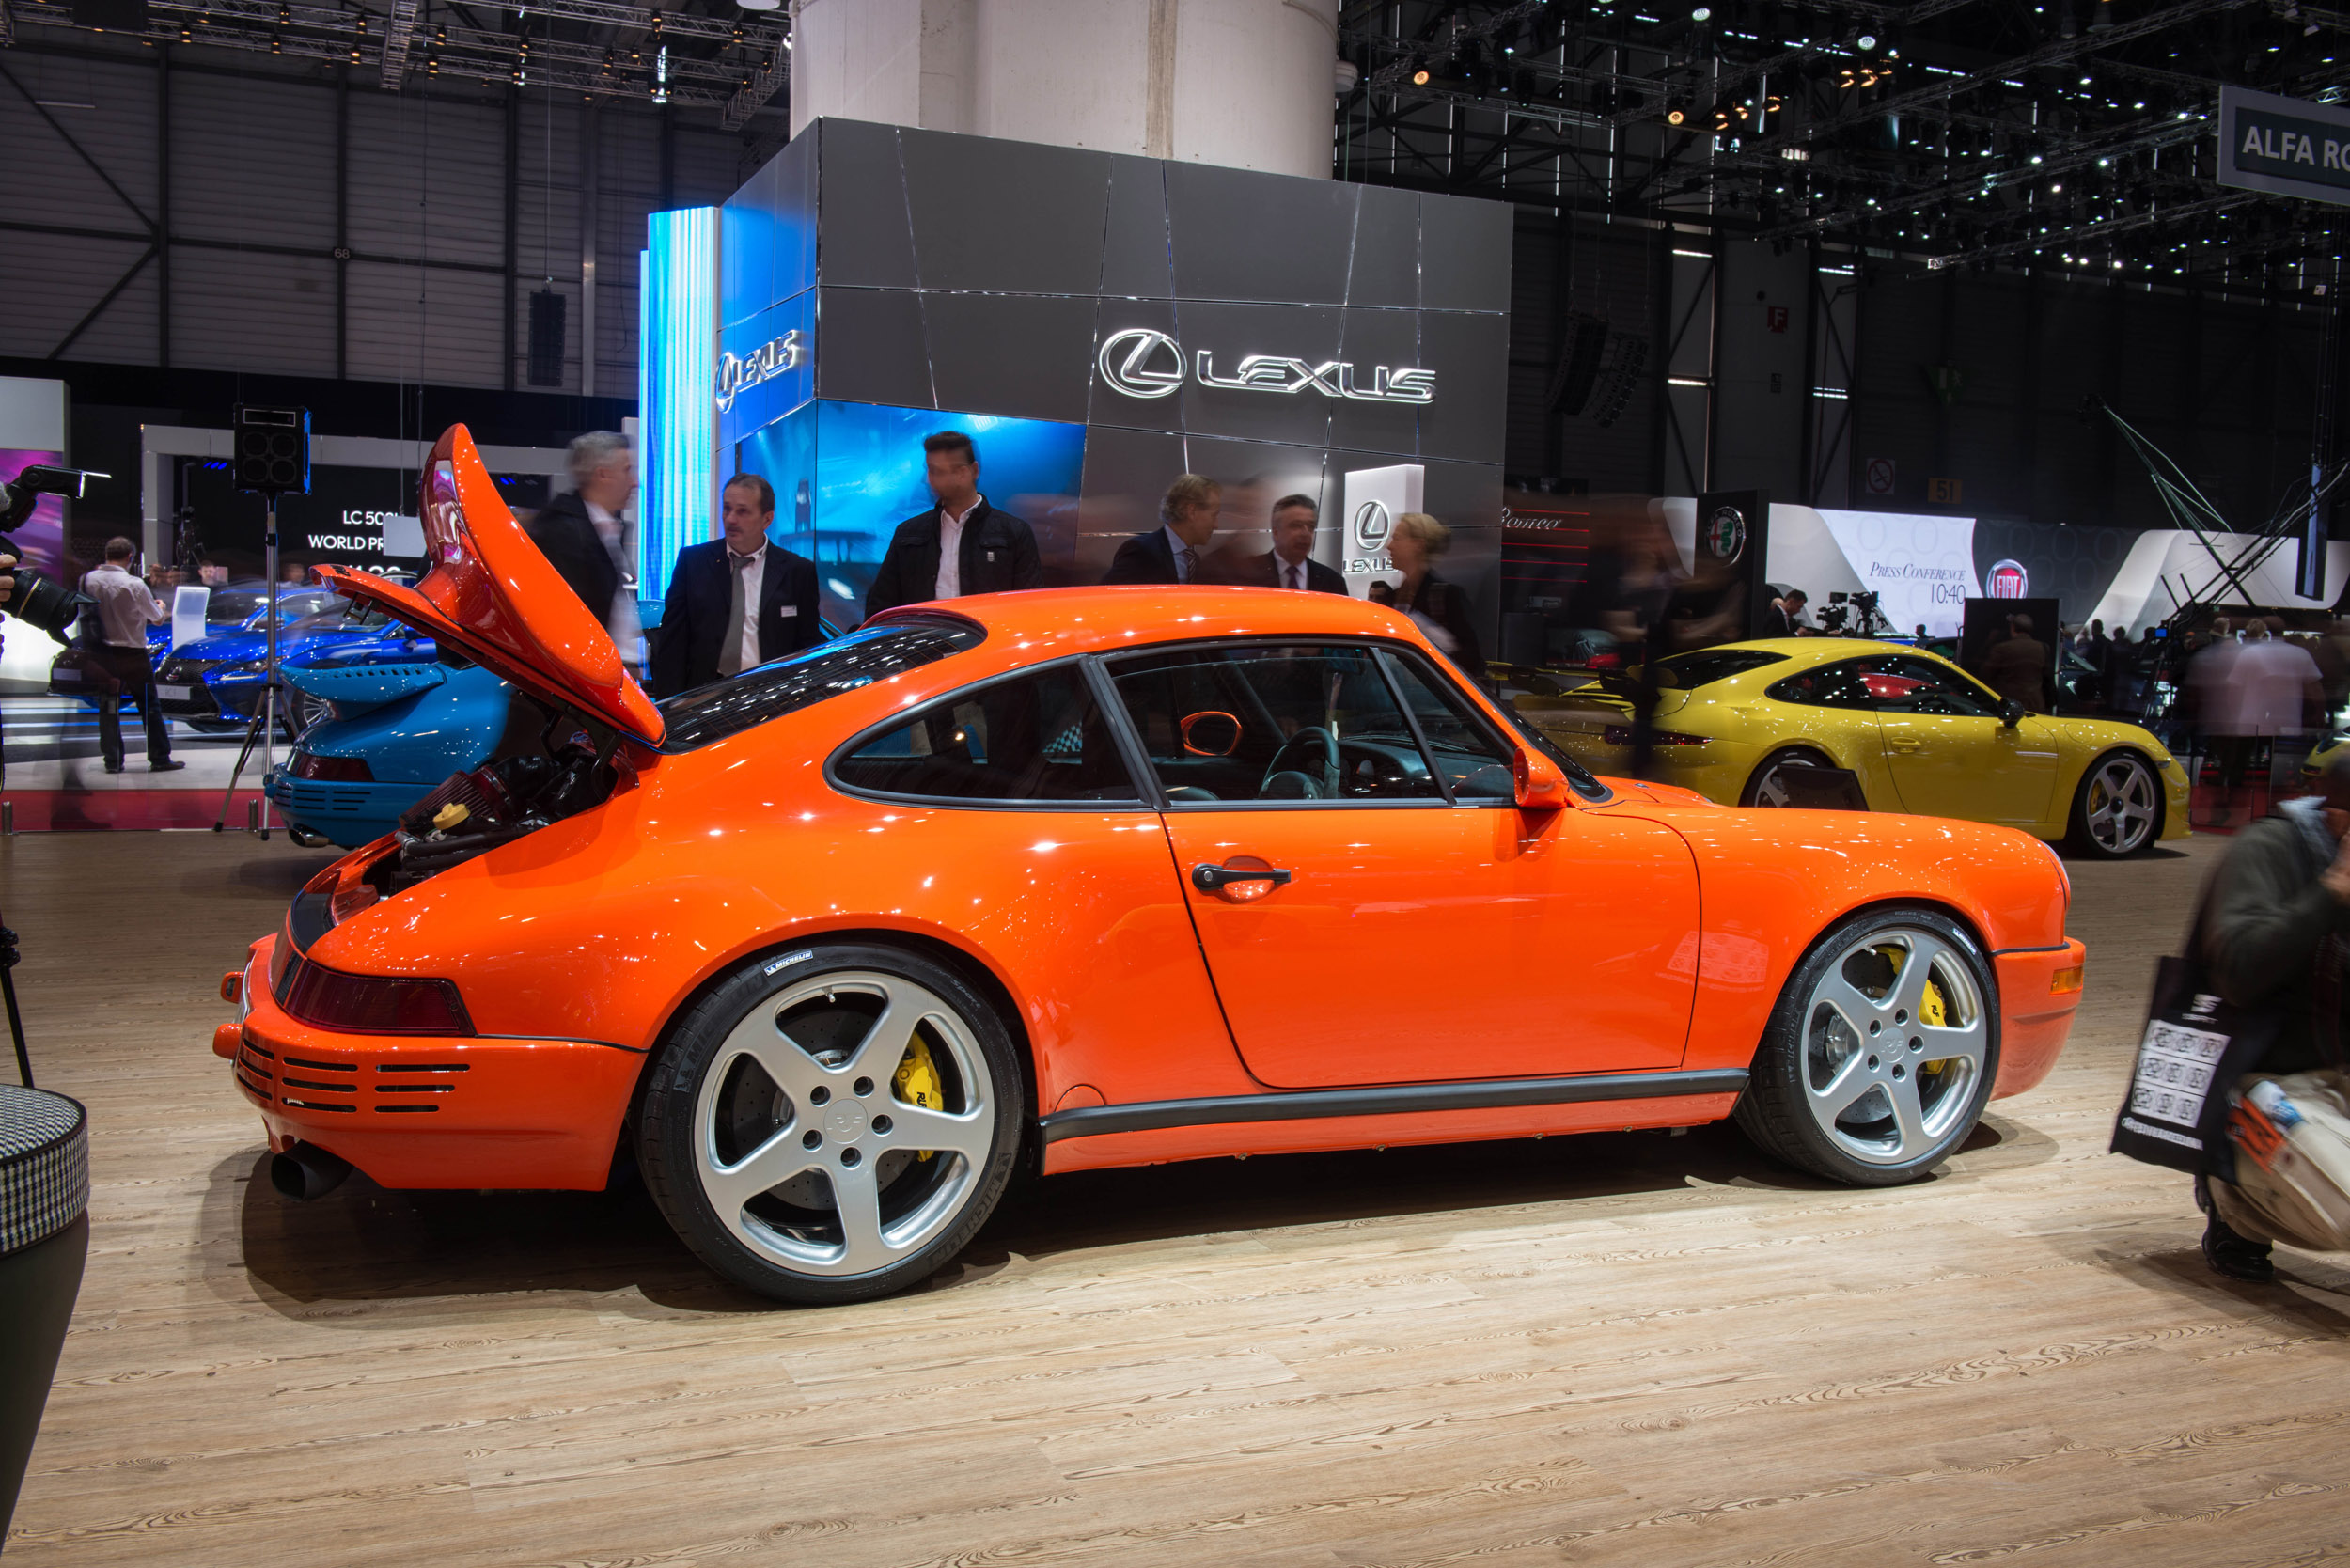 RUF Automobile at the 2016 Geneva motor show - in pictures | evo